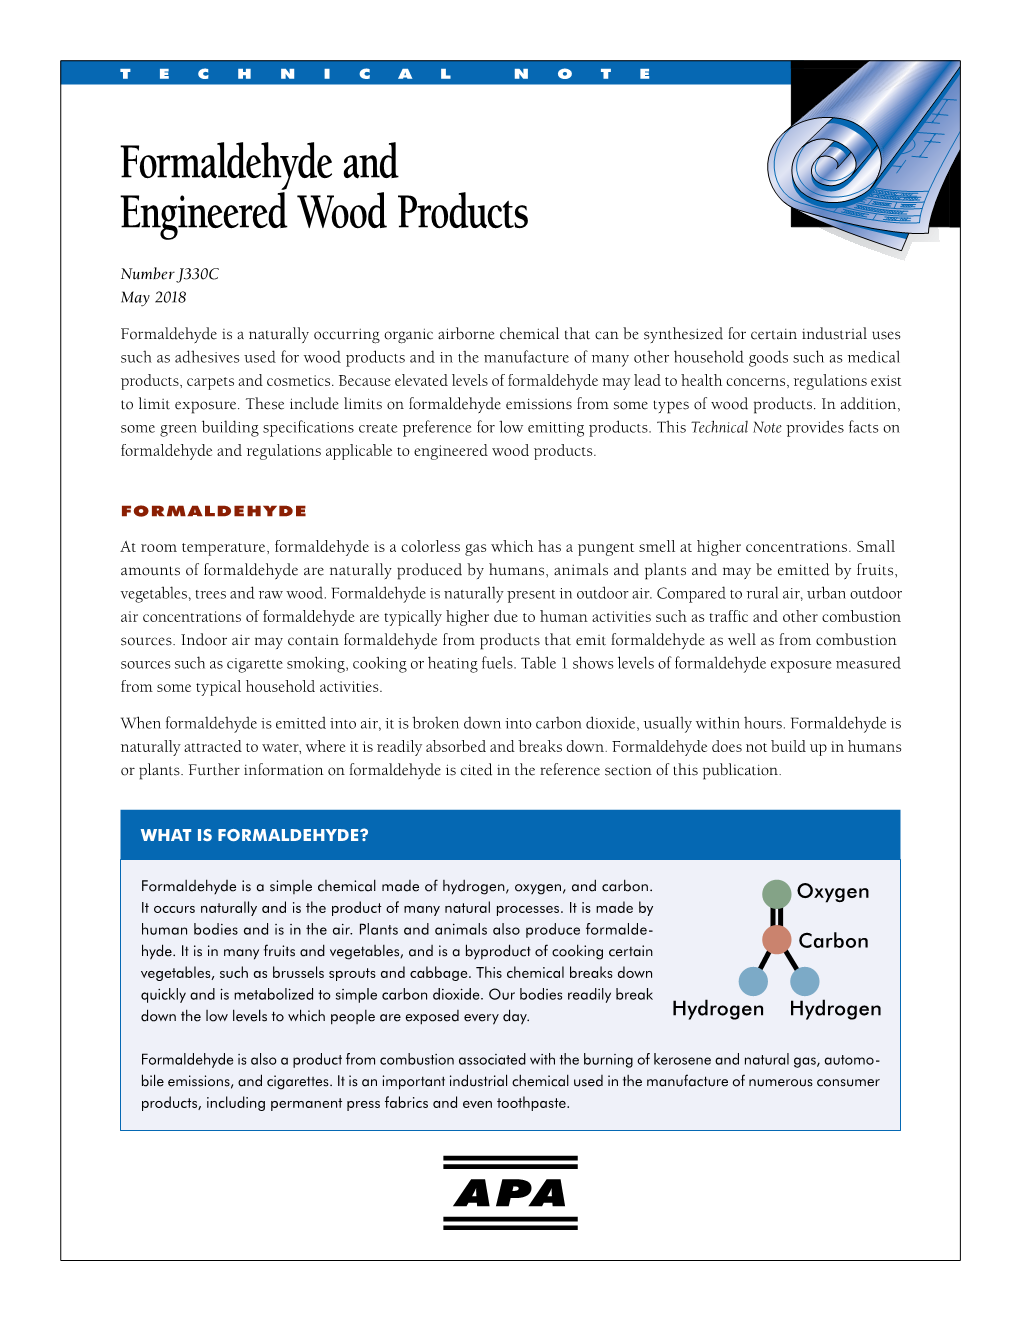 Formaldehyde and Engineered Wood Products